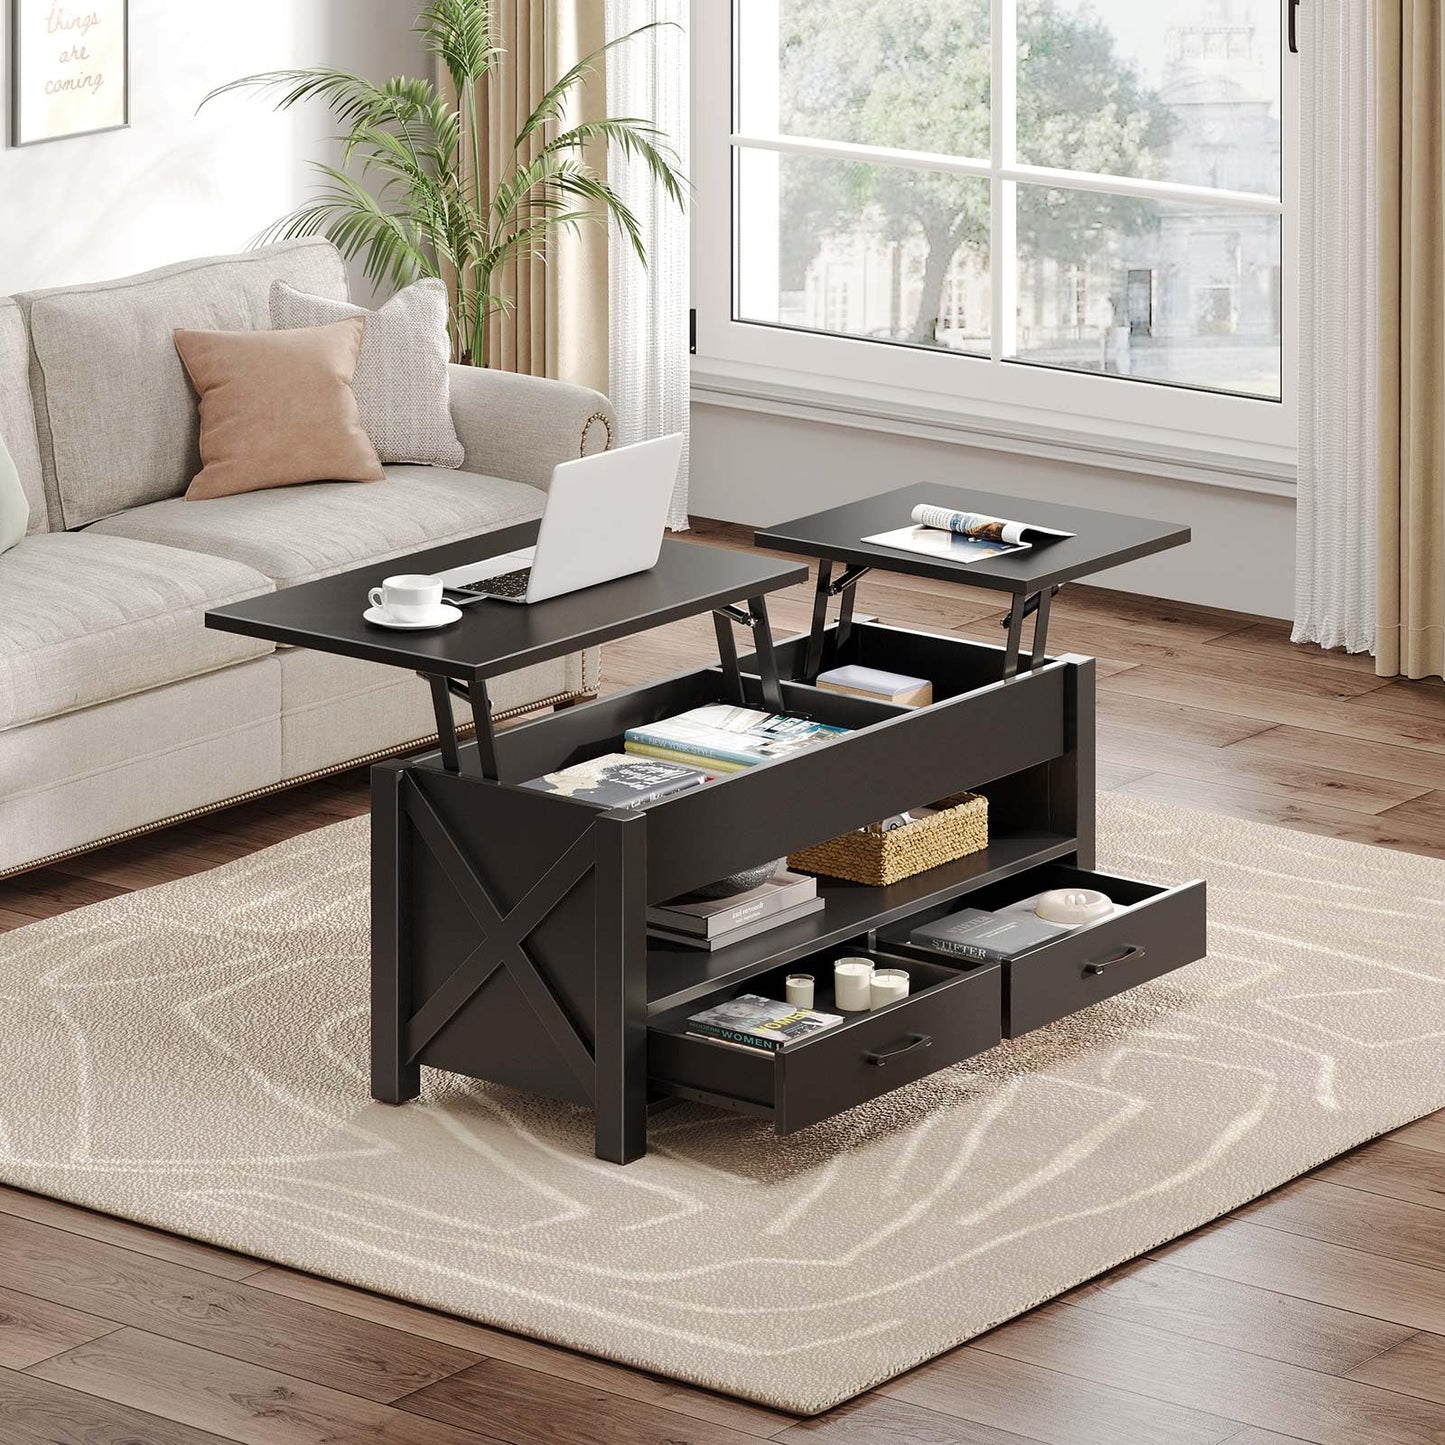 Seventable Coffee Table, 47.2" Lift Top Coffee Table with 2 Storage Drawers and Hidden Compartment, X Wood Farmhouse Support, Retro Center Table with Lift Tabletop for Living Room,Black